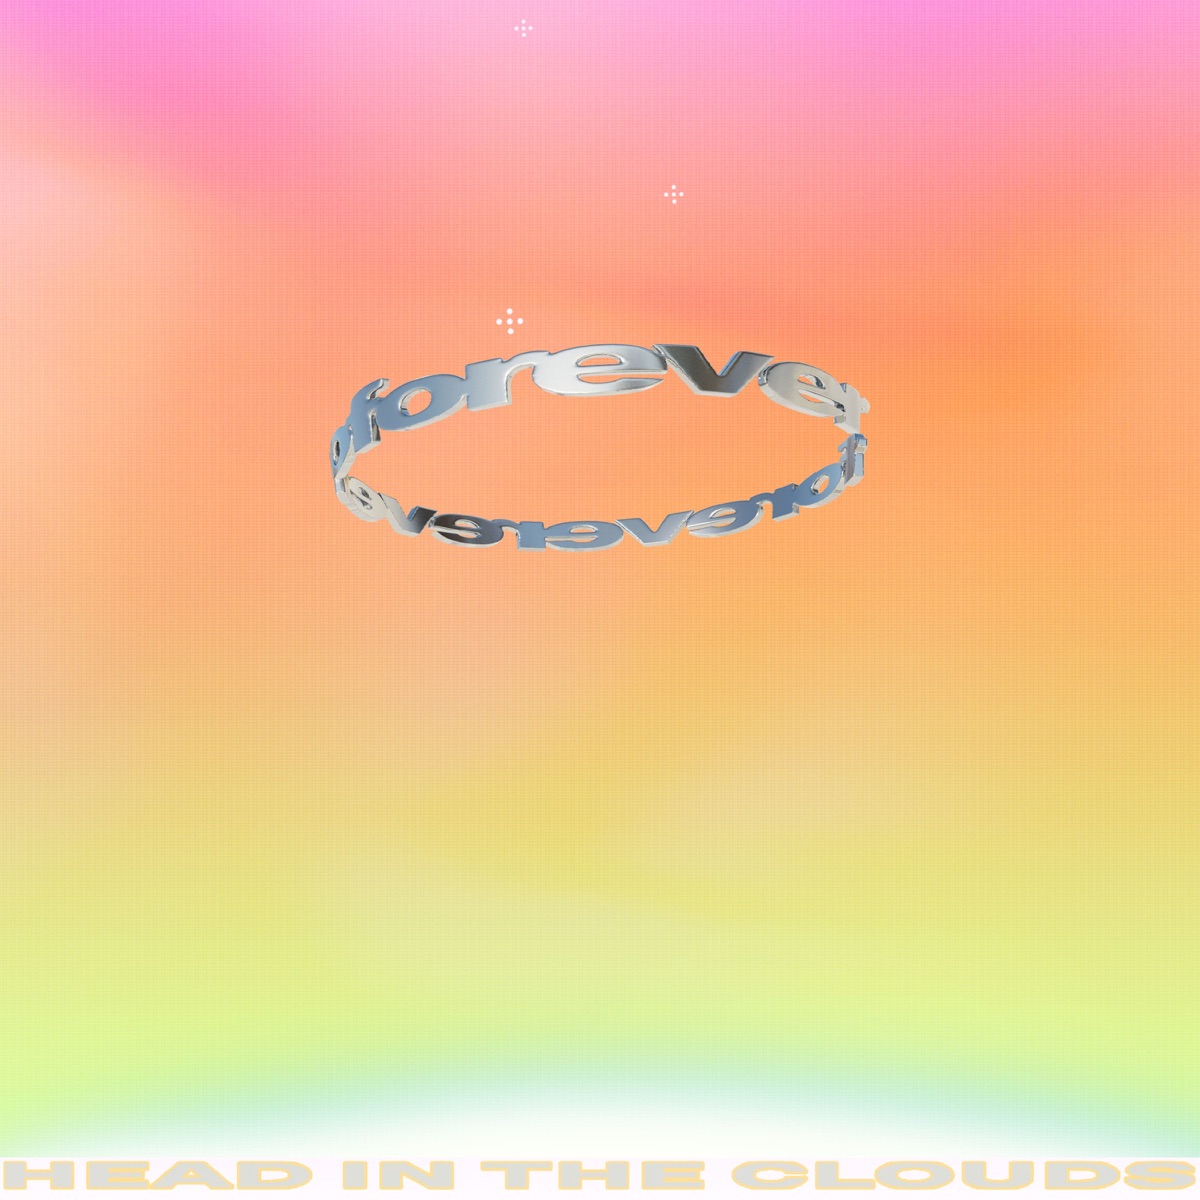 88rising – Head In The Clouds Forever – Single